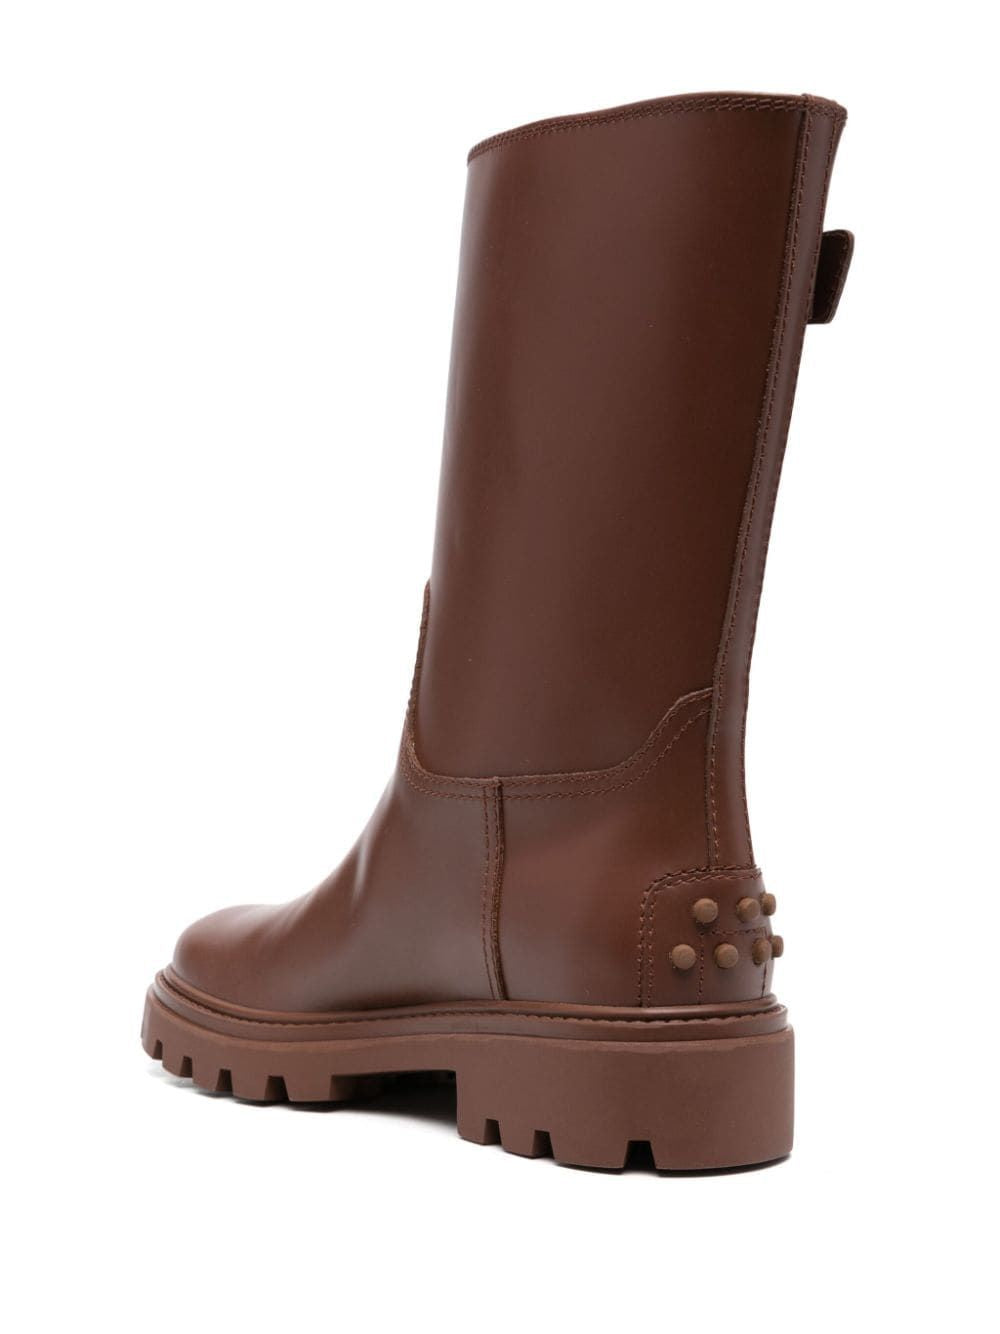 Stylish Buckle-Detail Leather Boots for Women in Brown